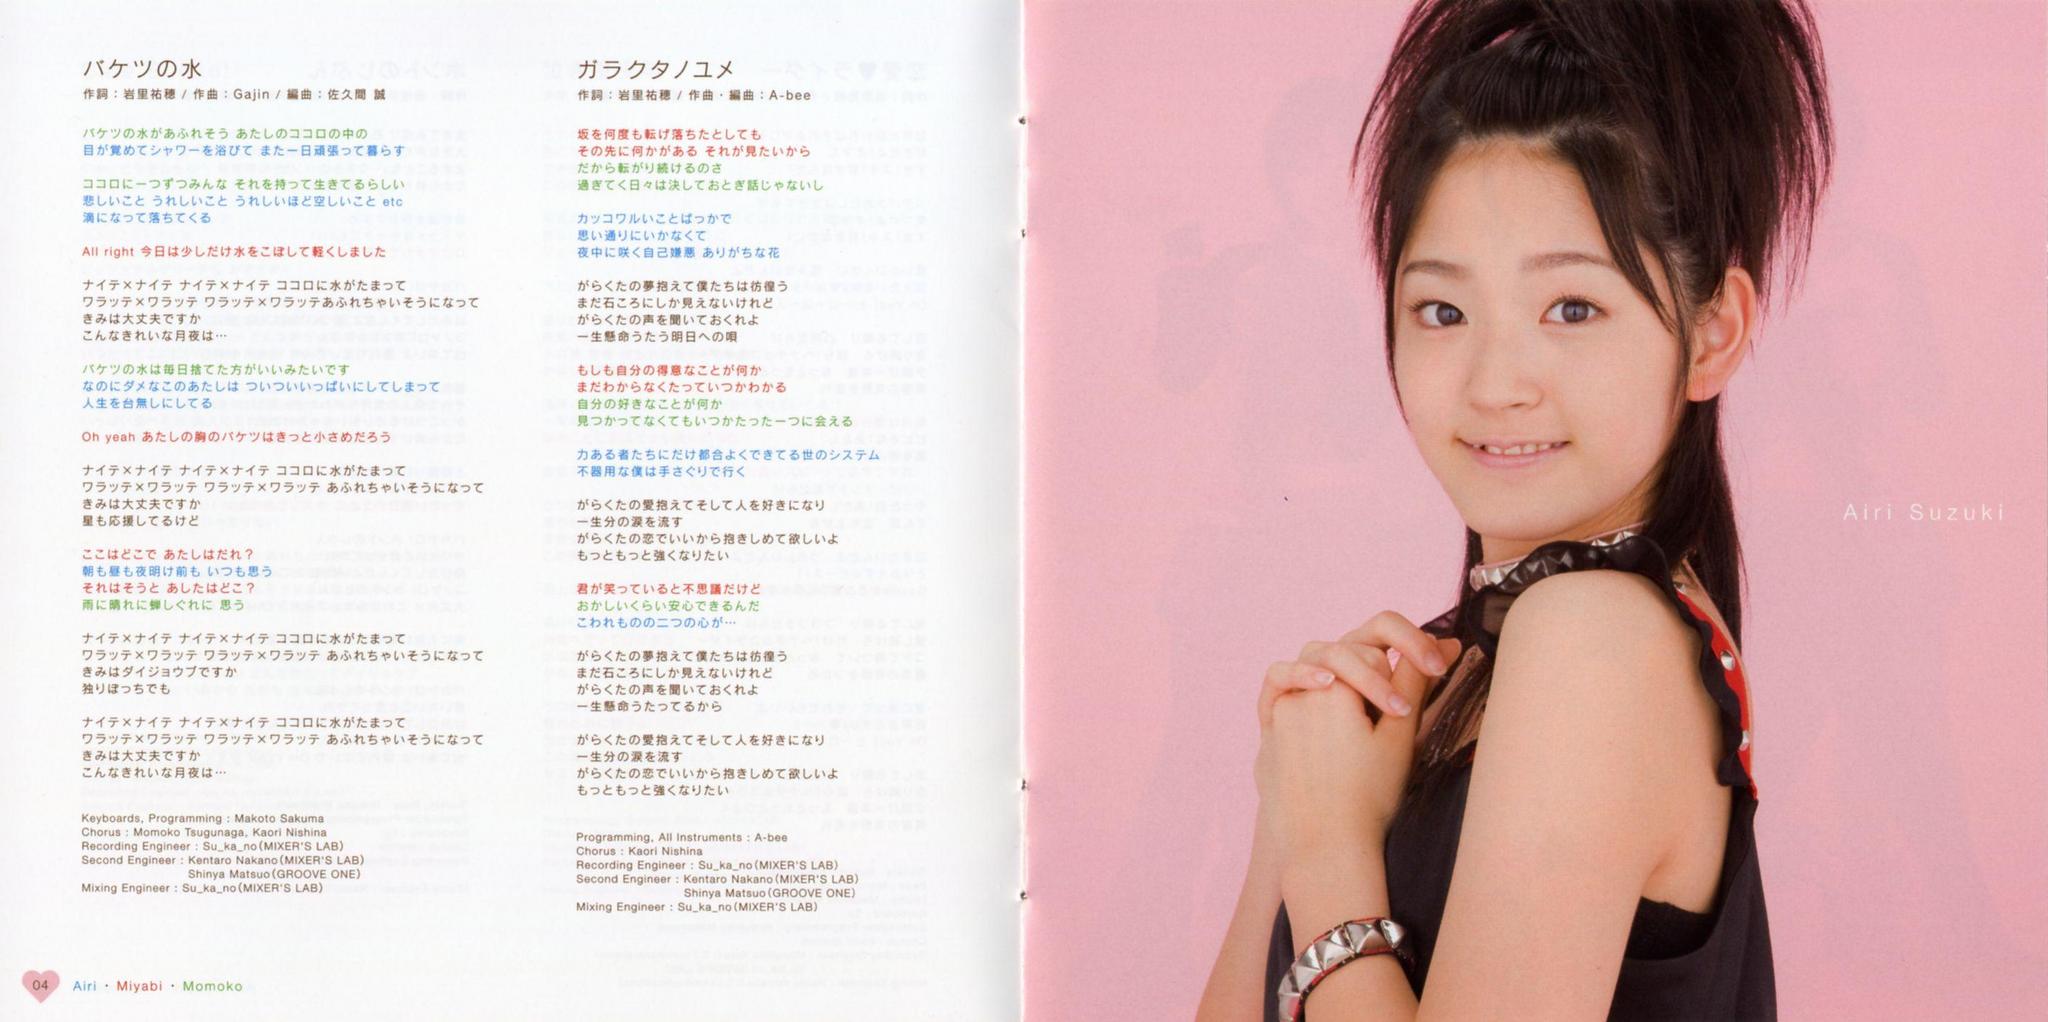 Cafe Buono Booklet Scan